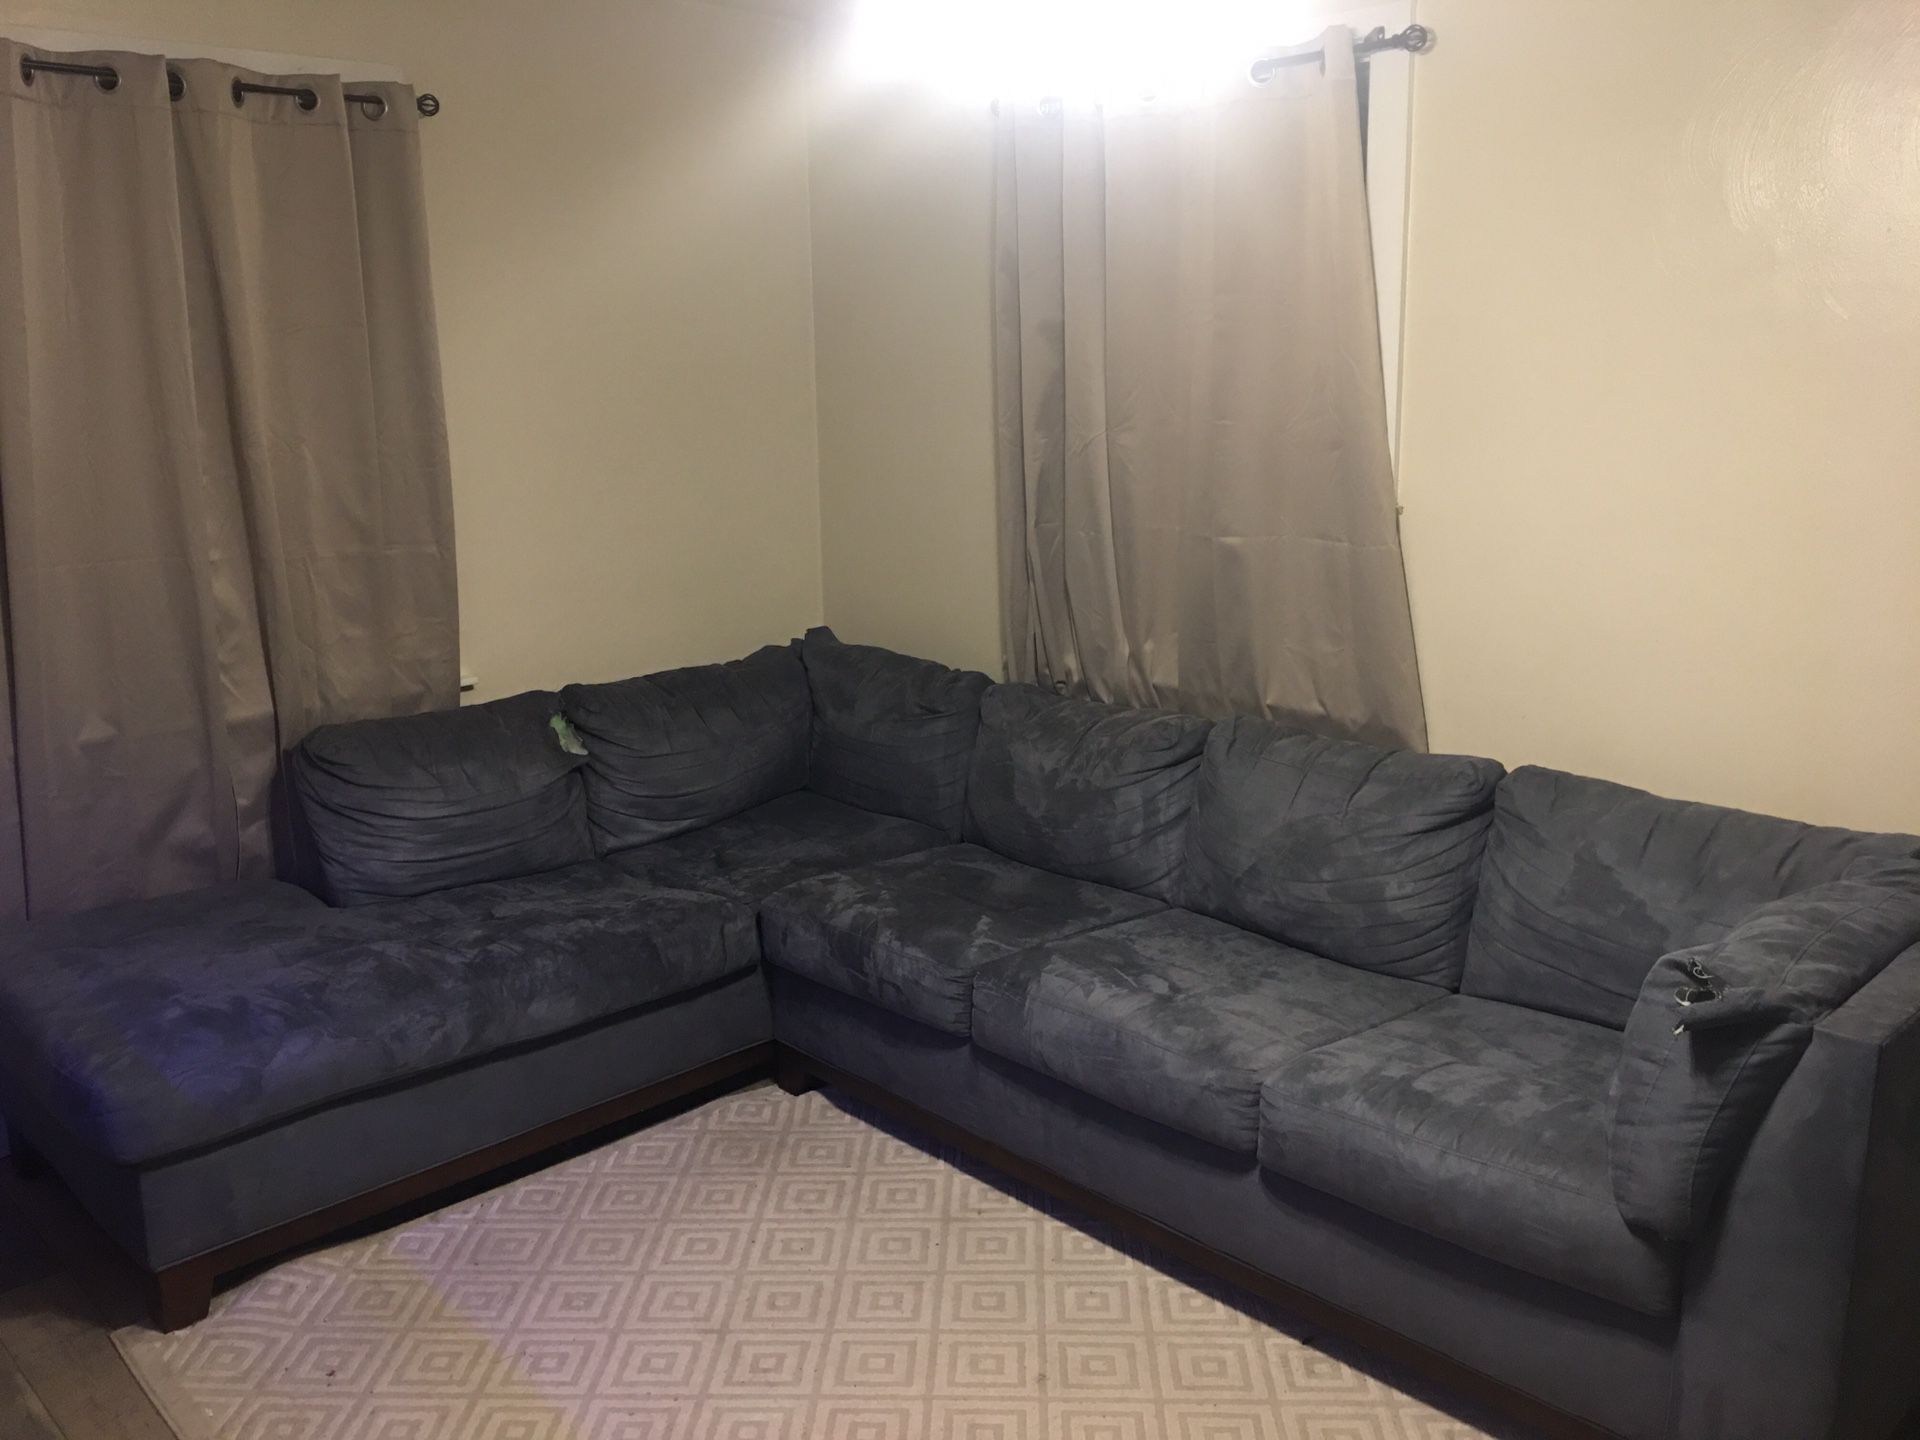 FREE 2PC Sectional Couch